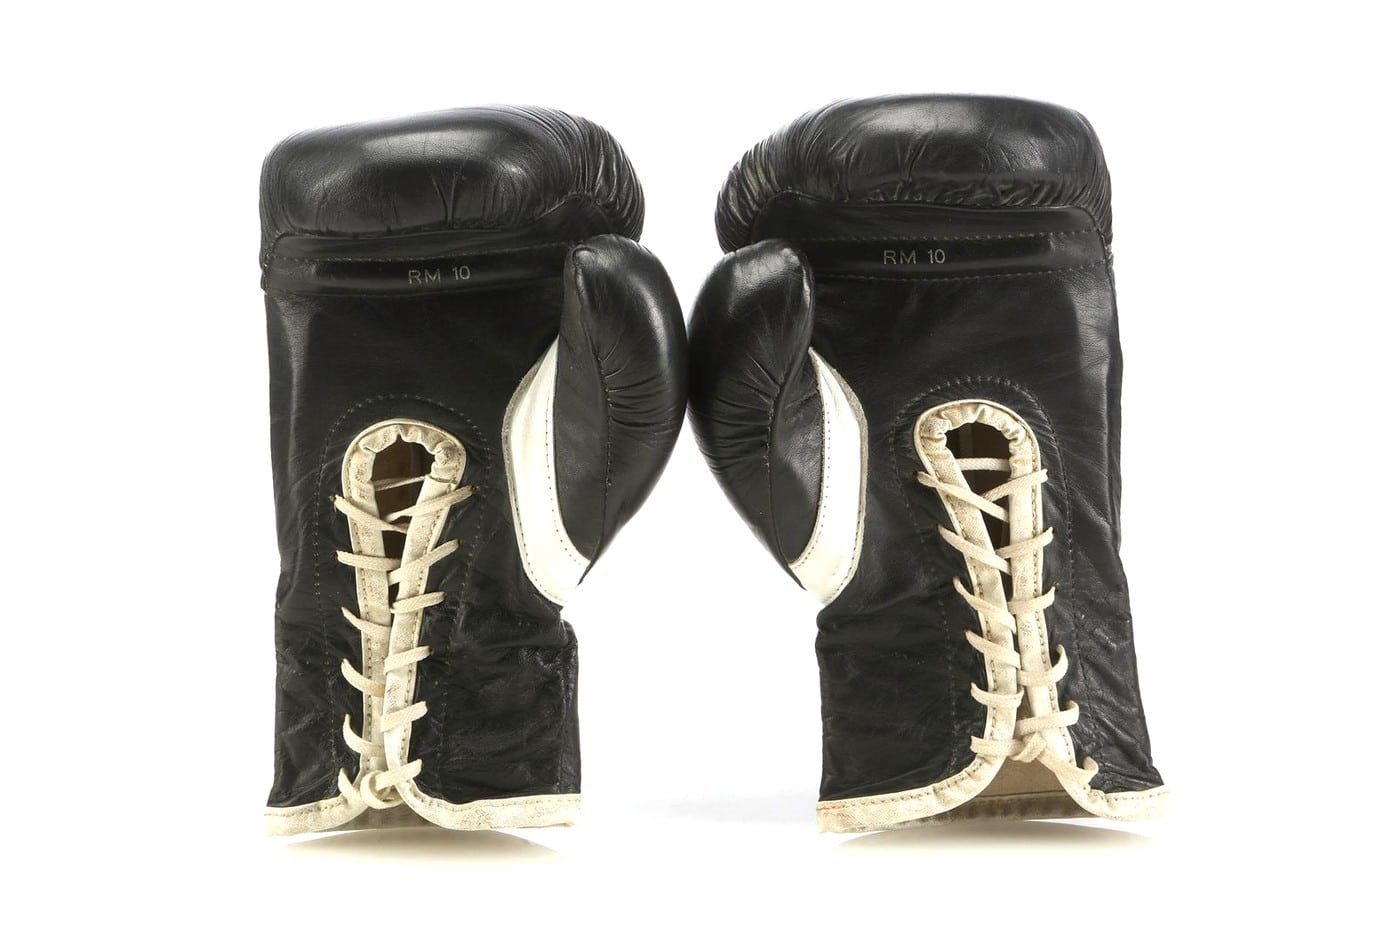 Rocky movie boxing gloves up for auction - HIGHXTAR.